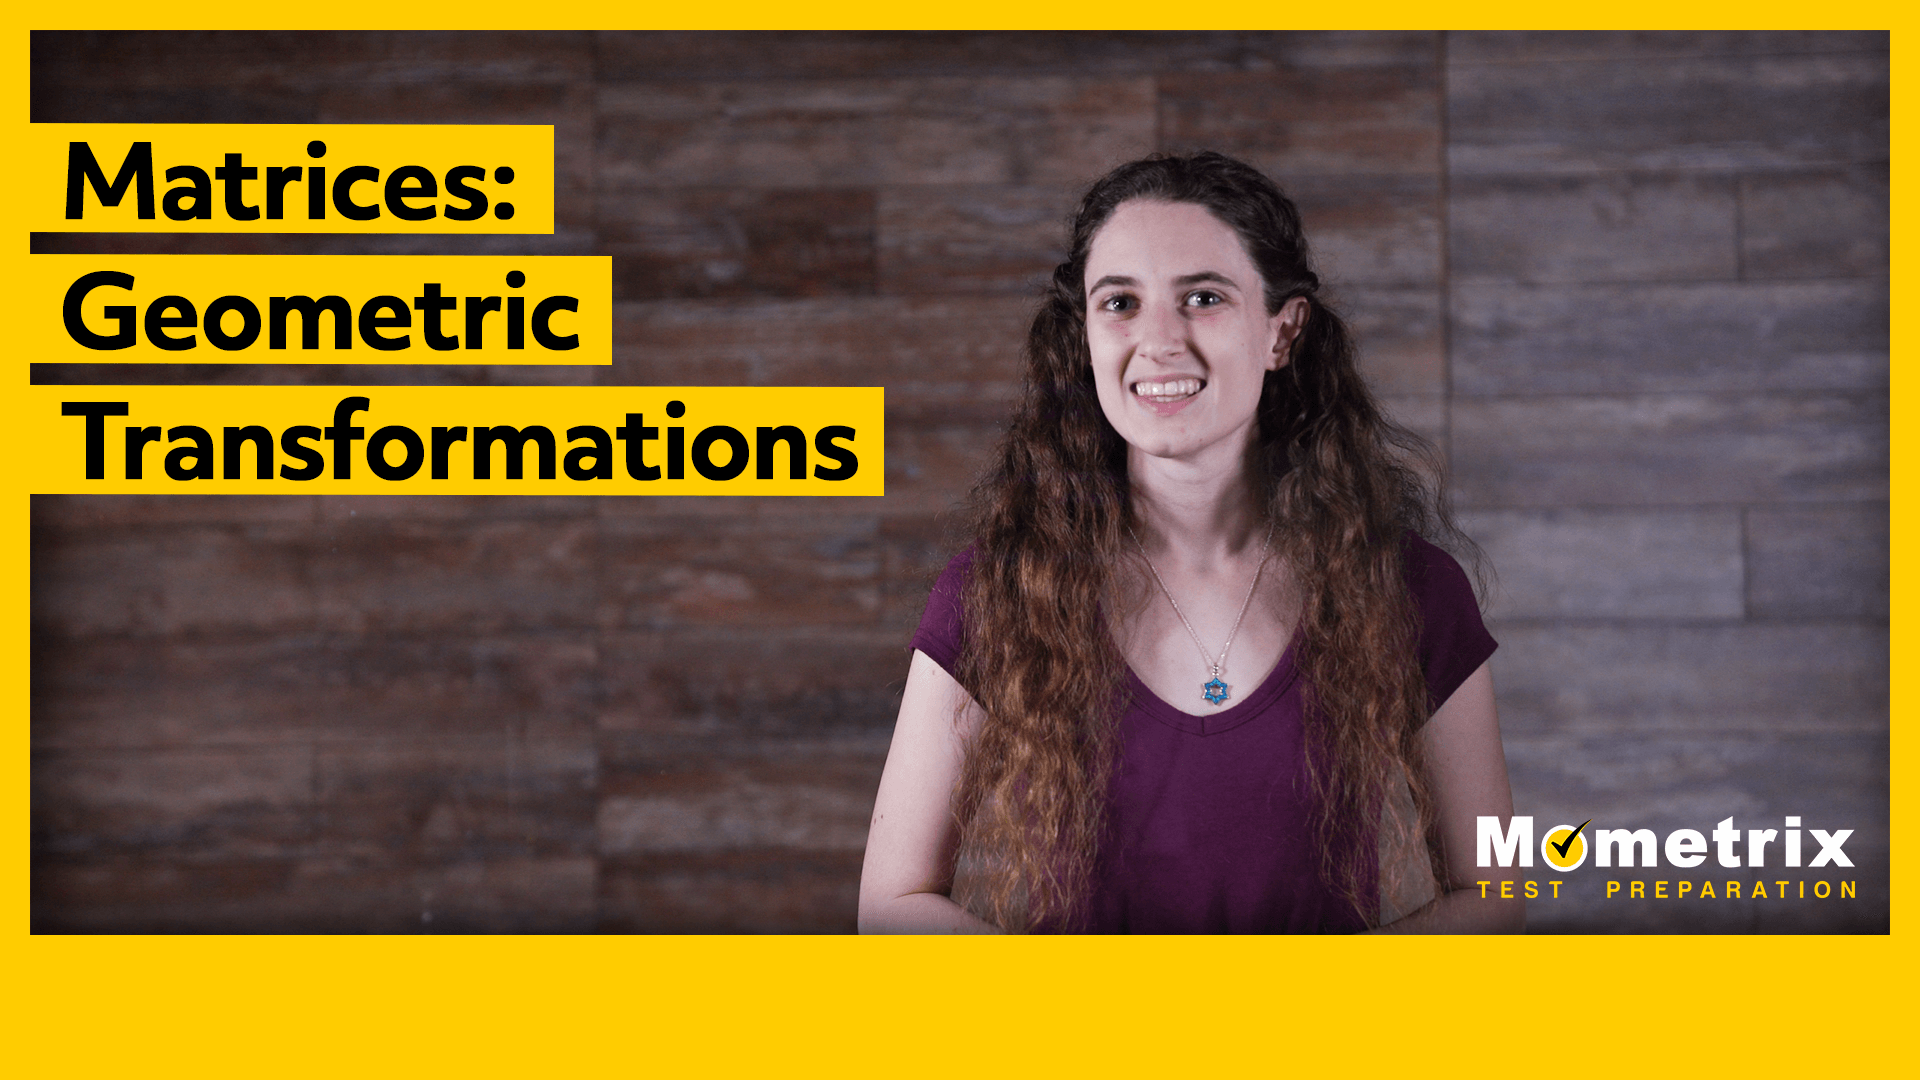 A person with long hair stands in front of a wooden background, smiling. The text reads "Matrices: Geometric Transformations" and "Mometrix Test Preparation.